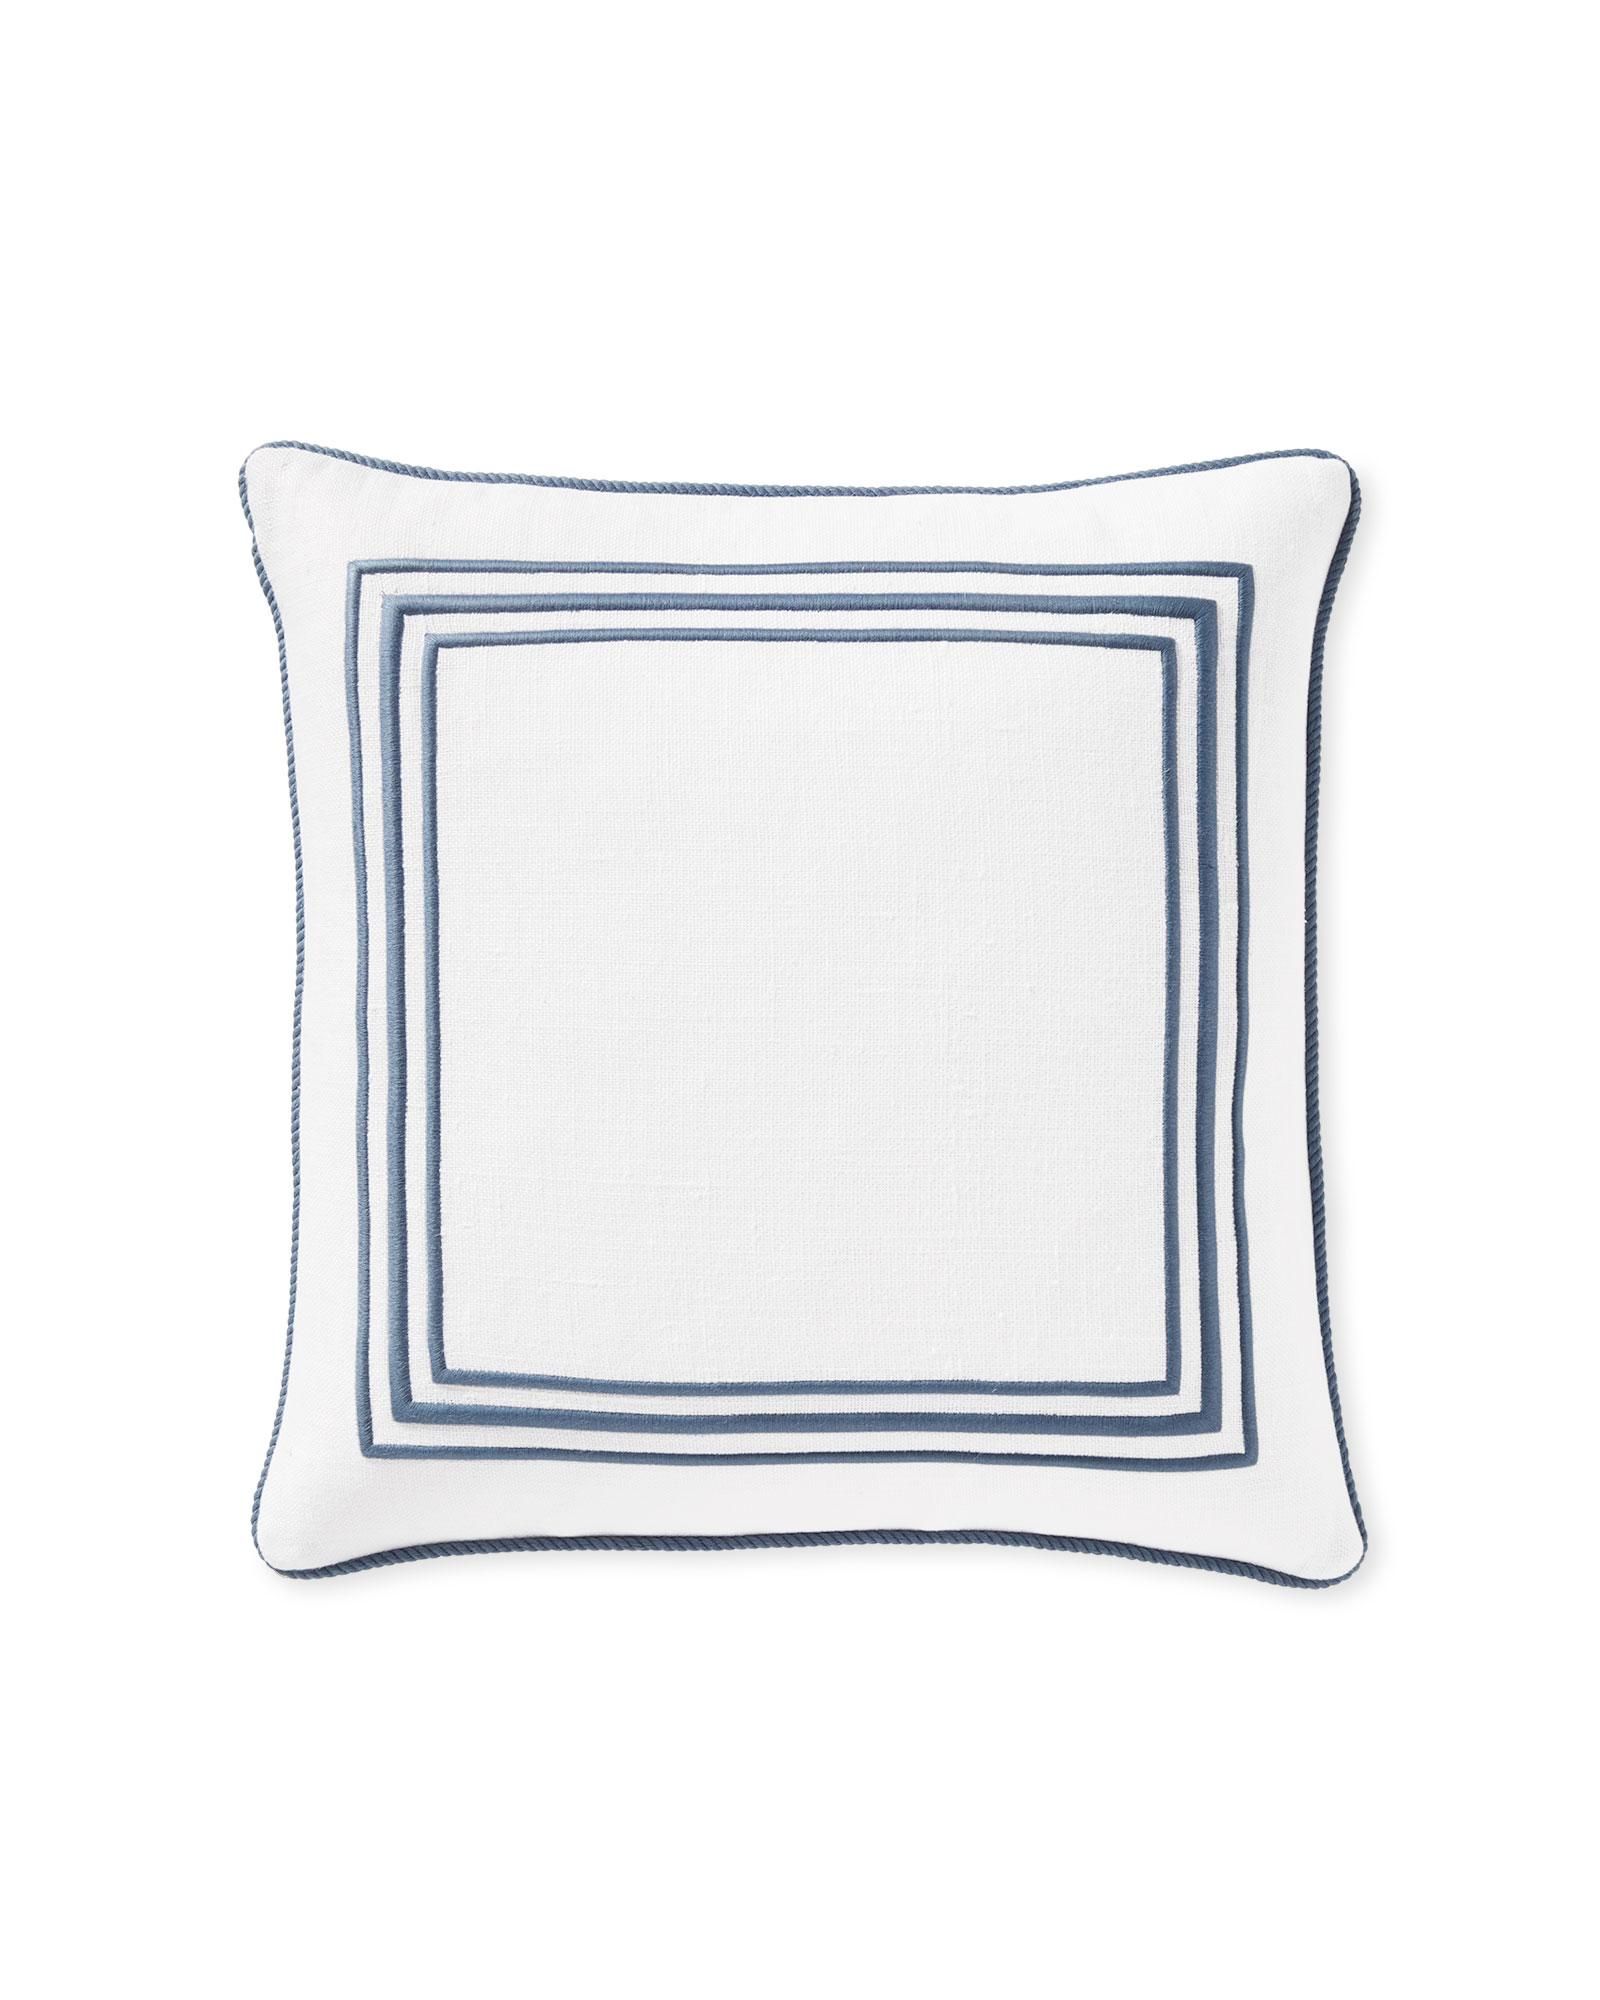 Riva Pillow Cover | Serena and Lily